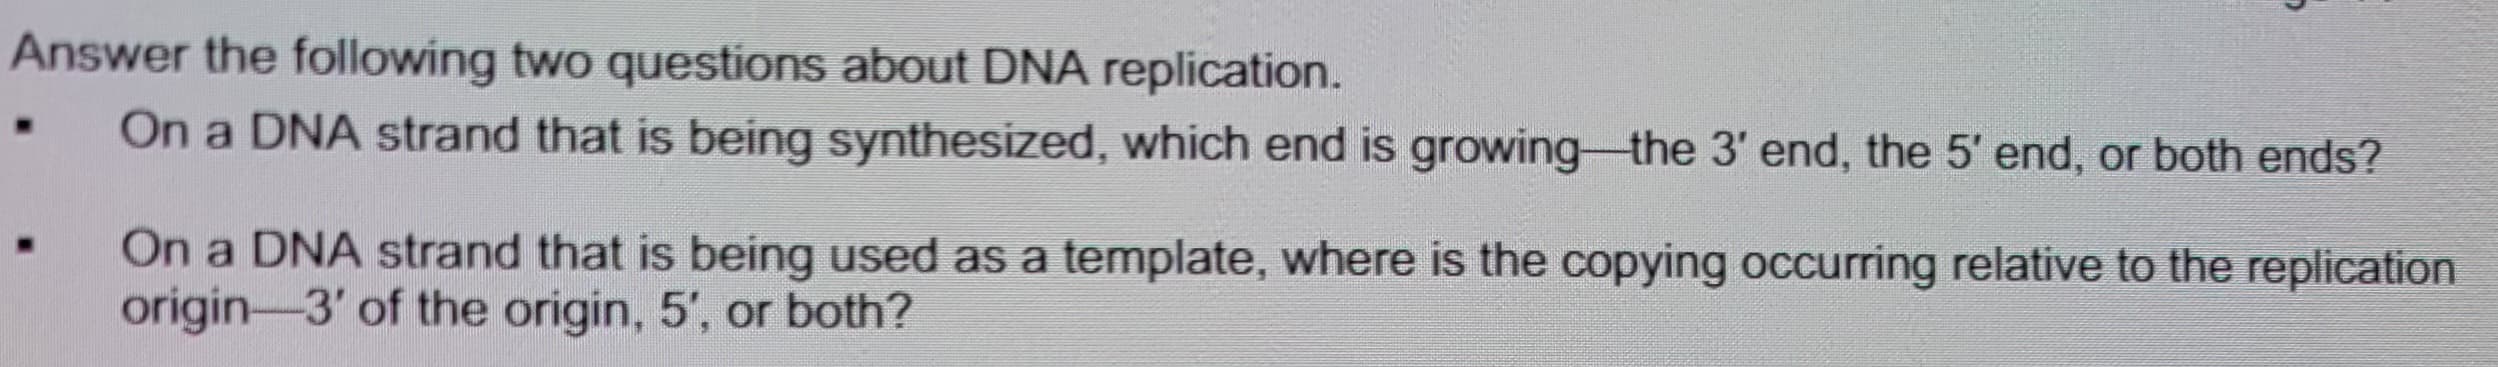 Answer the following two questions about DNA replication.
On a DNA strand that is being synthesized, which end is growing the 3' end, the 5' end, or both ends?
.
On a DNA strand that is being used as a template, where is the copying occurring relative to the replication
origin-3' of the origin, 5', or both?